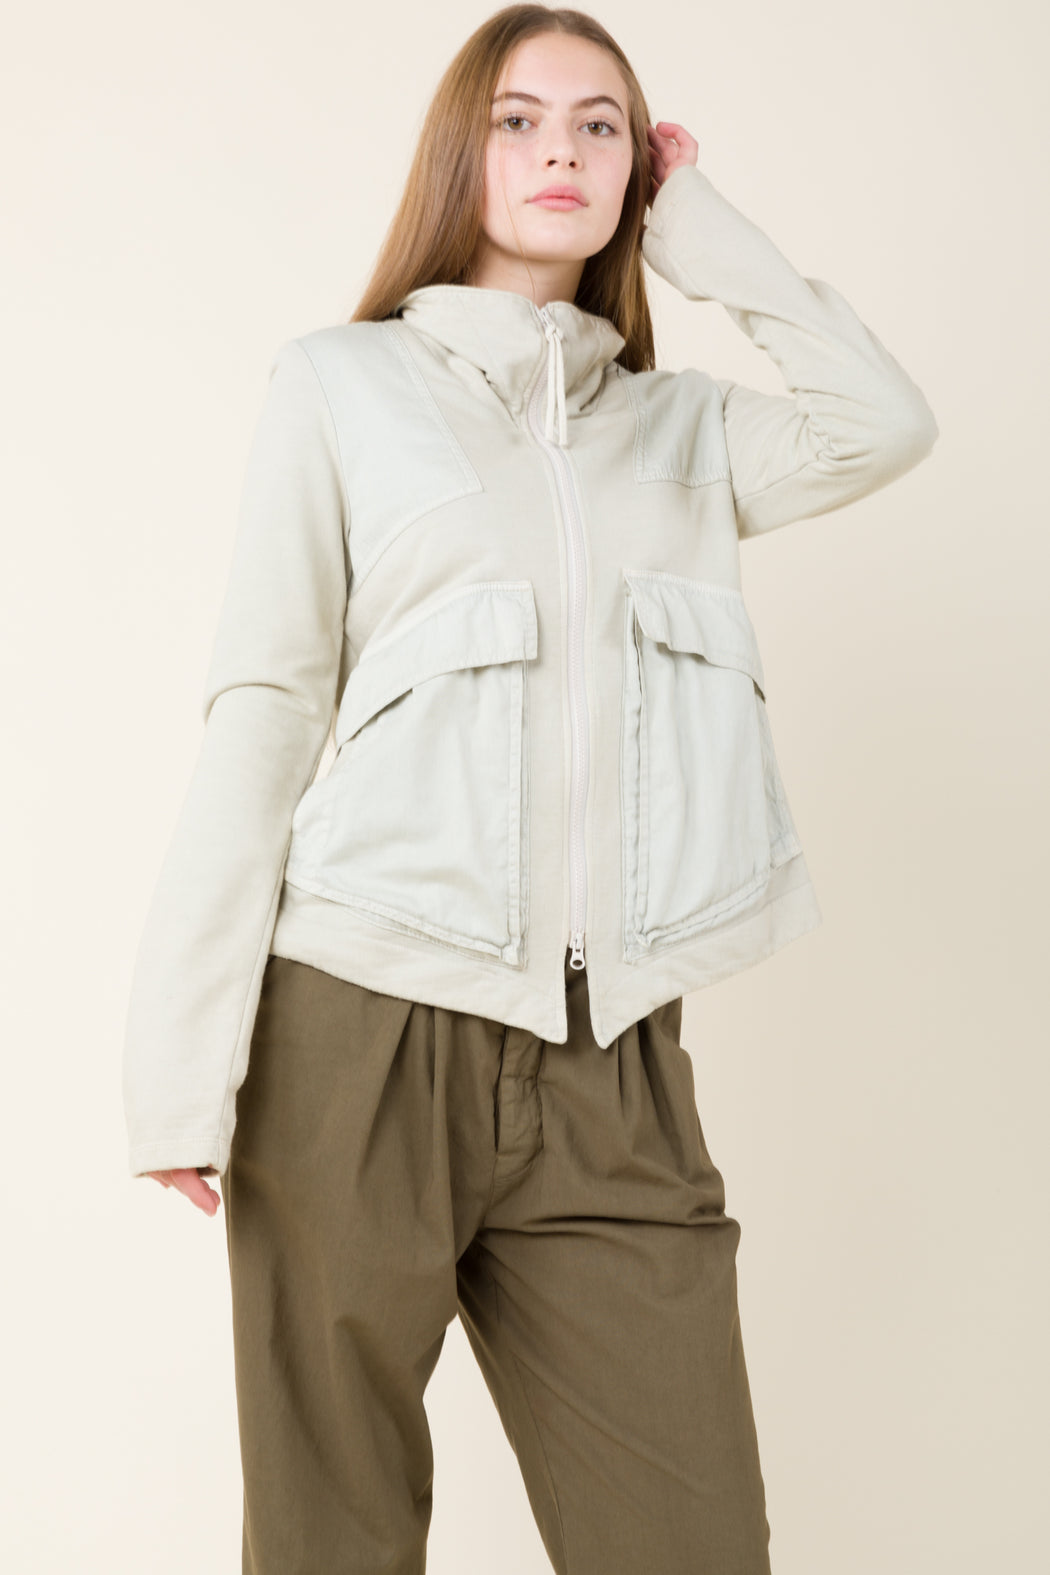 The Hunter jacket is a contemporary zip-up sweatshirt composed of 100% organic cotton, with soft sateen overlays, deep gusseted pockets, and a zip all the way up the neckline, perfect for all-year wear. 